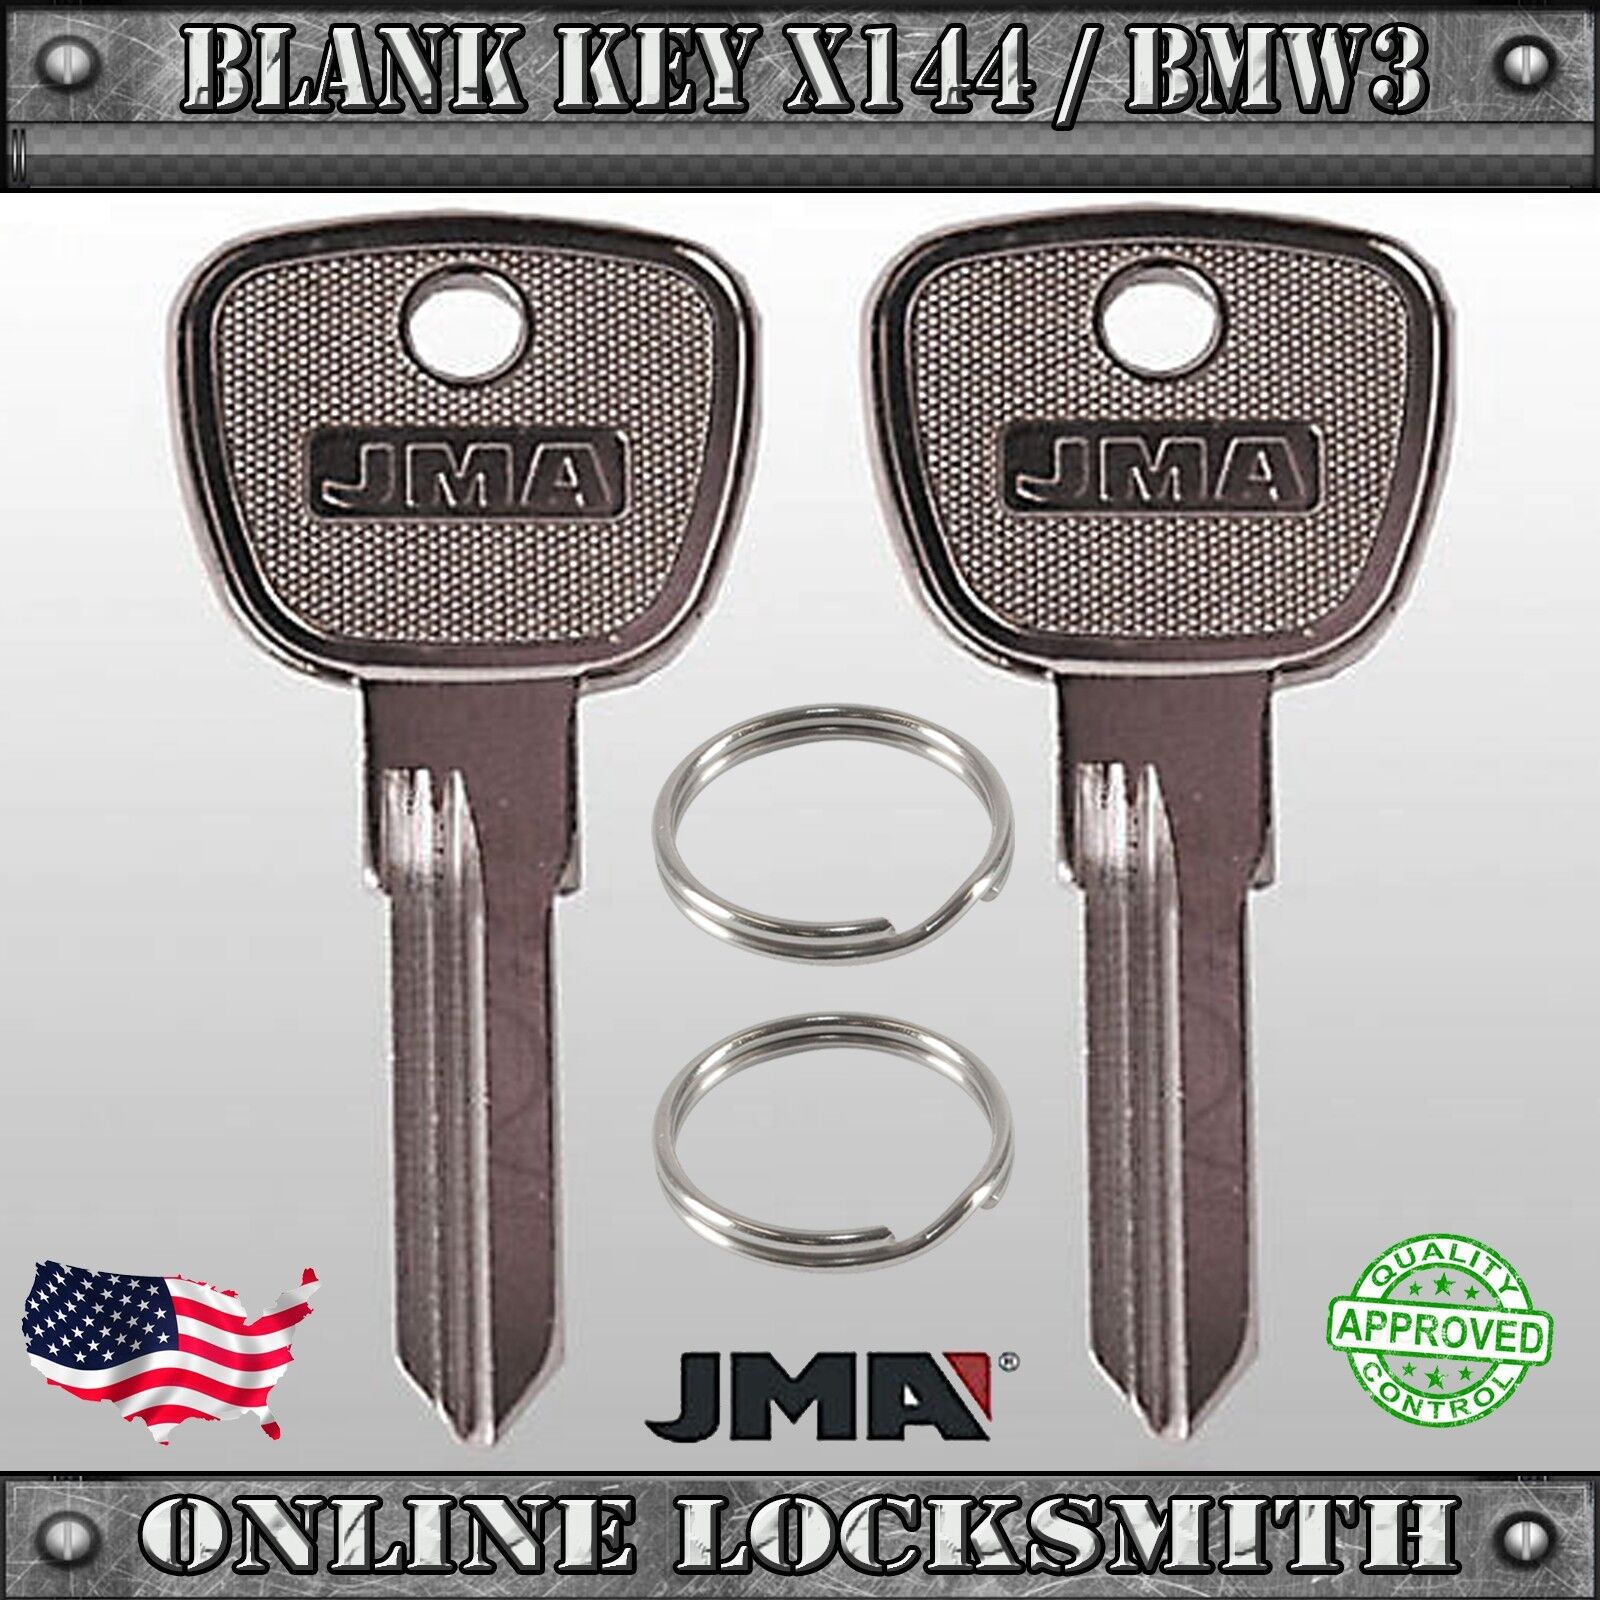 2 New Uncut Replacement Keys For Older BMW 3 / 5 / 6 / 7 Series - X144 / BMW3 